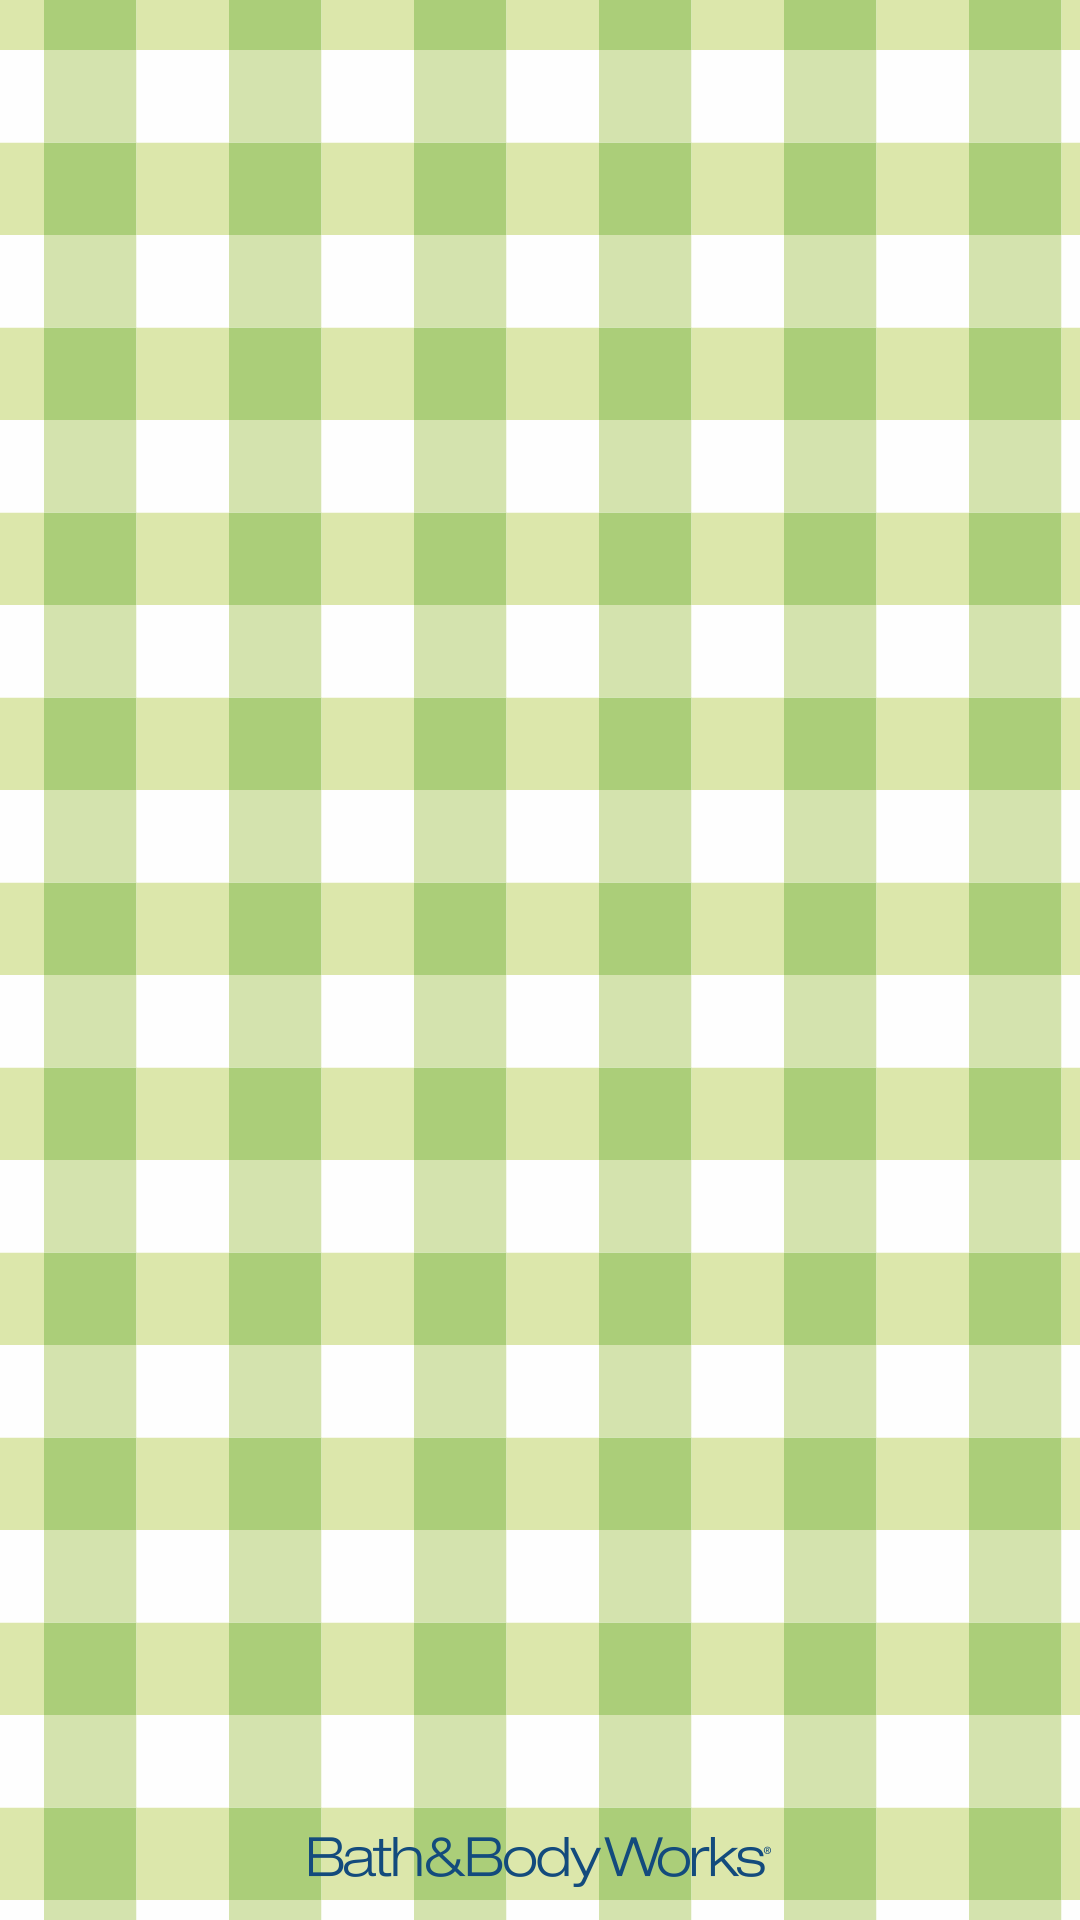 Green Gingham iPhone Wallpaper Background. Cute patterns wallpaper, Plaid wallpaper, Grid wallpaper